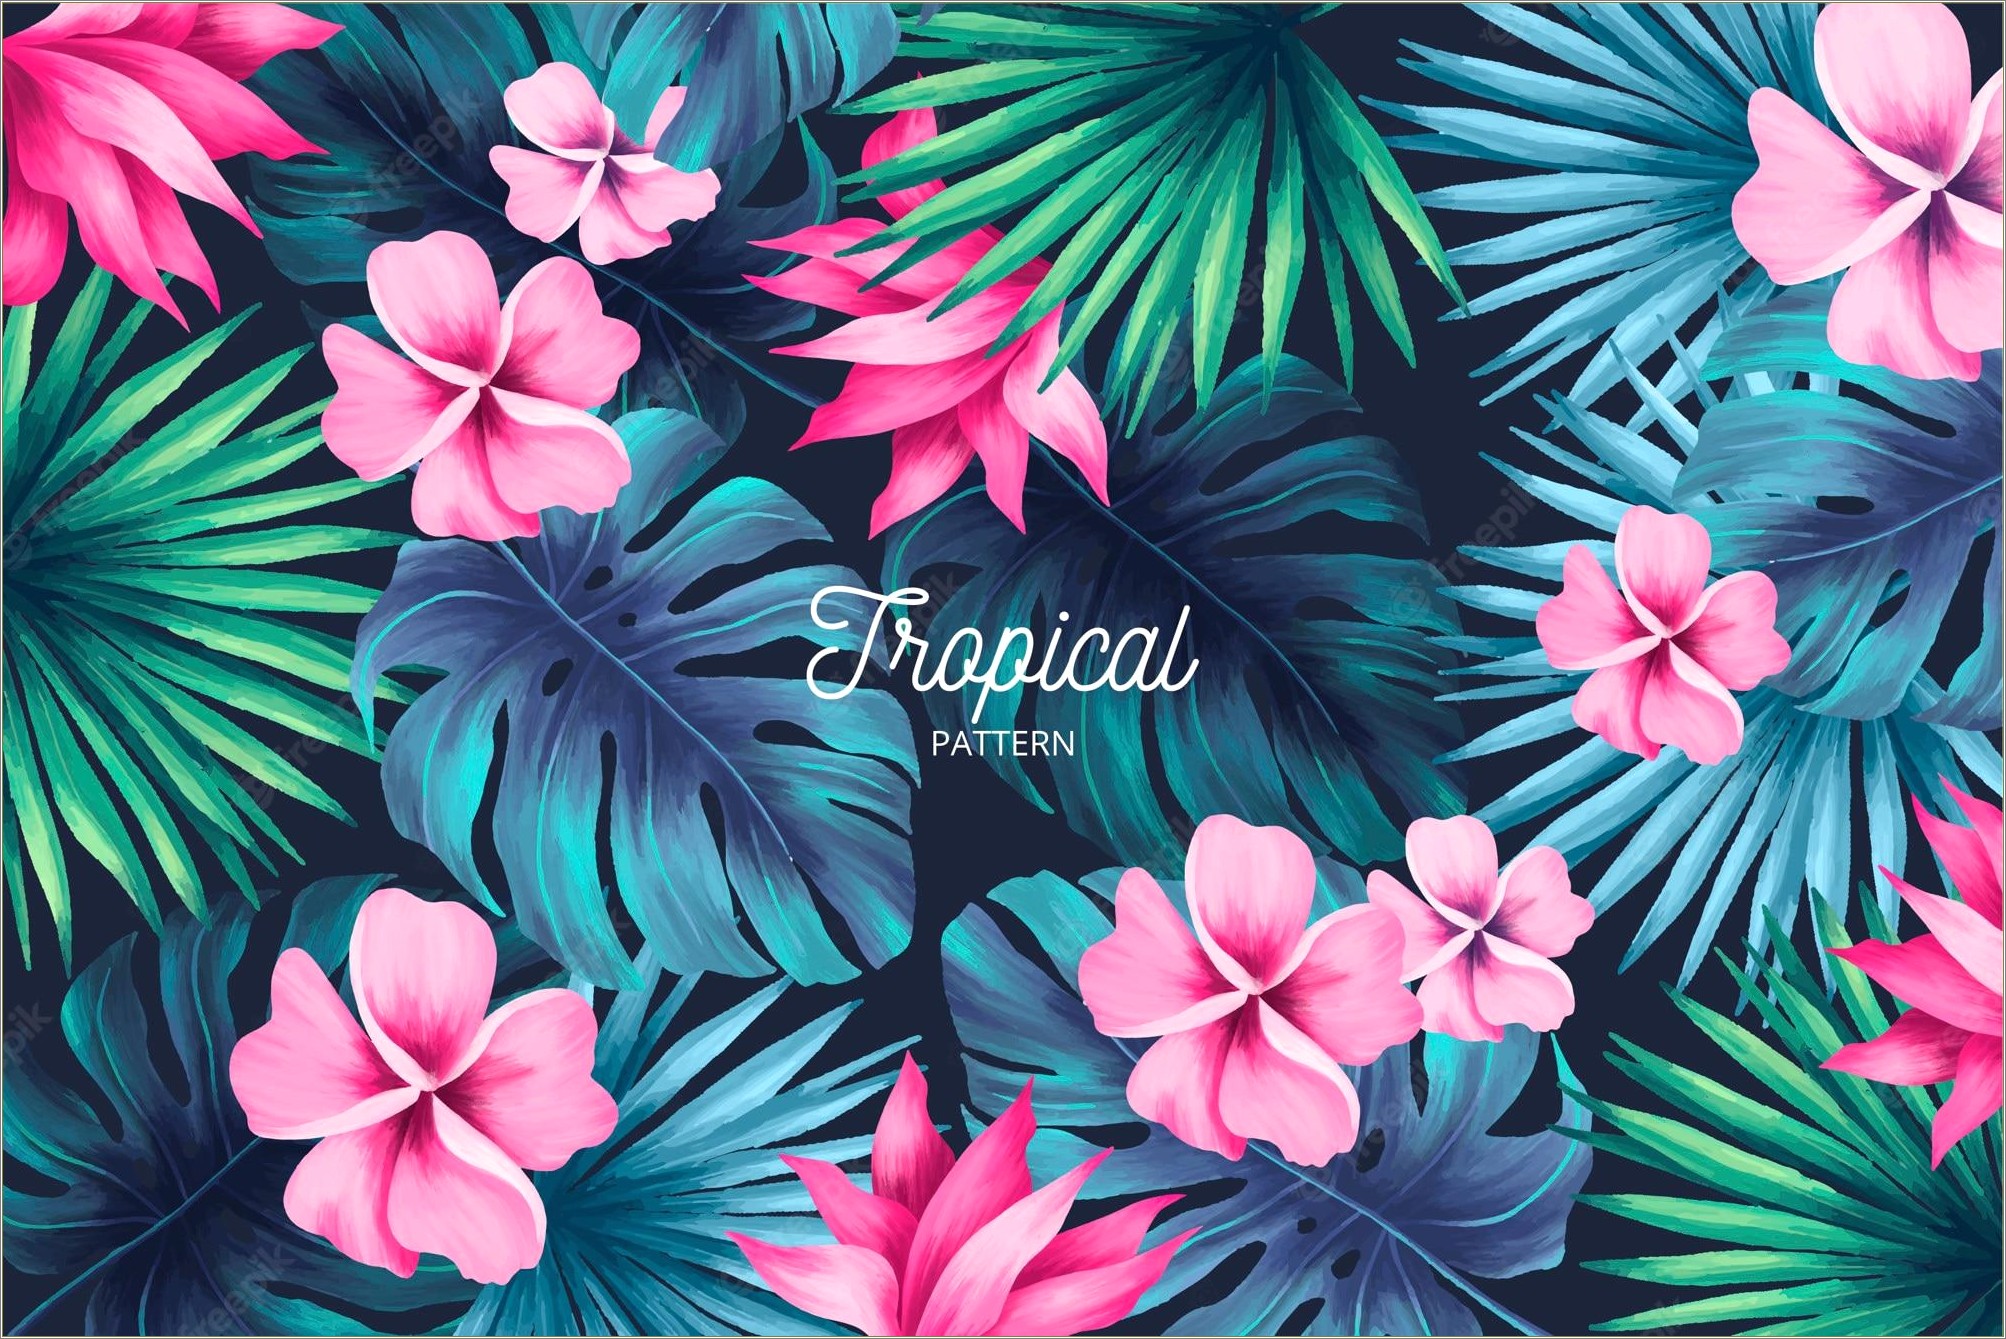 3d Paper Tropical Flower Templates Free Printable